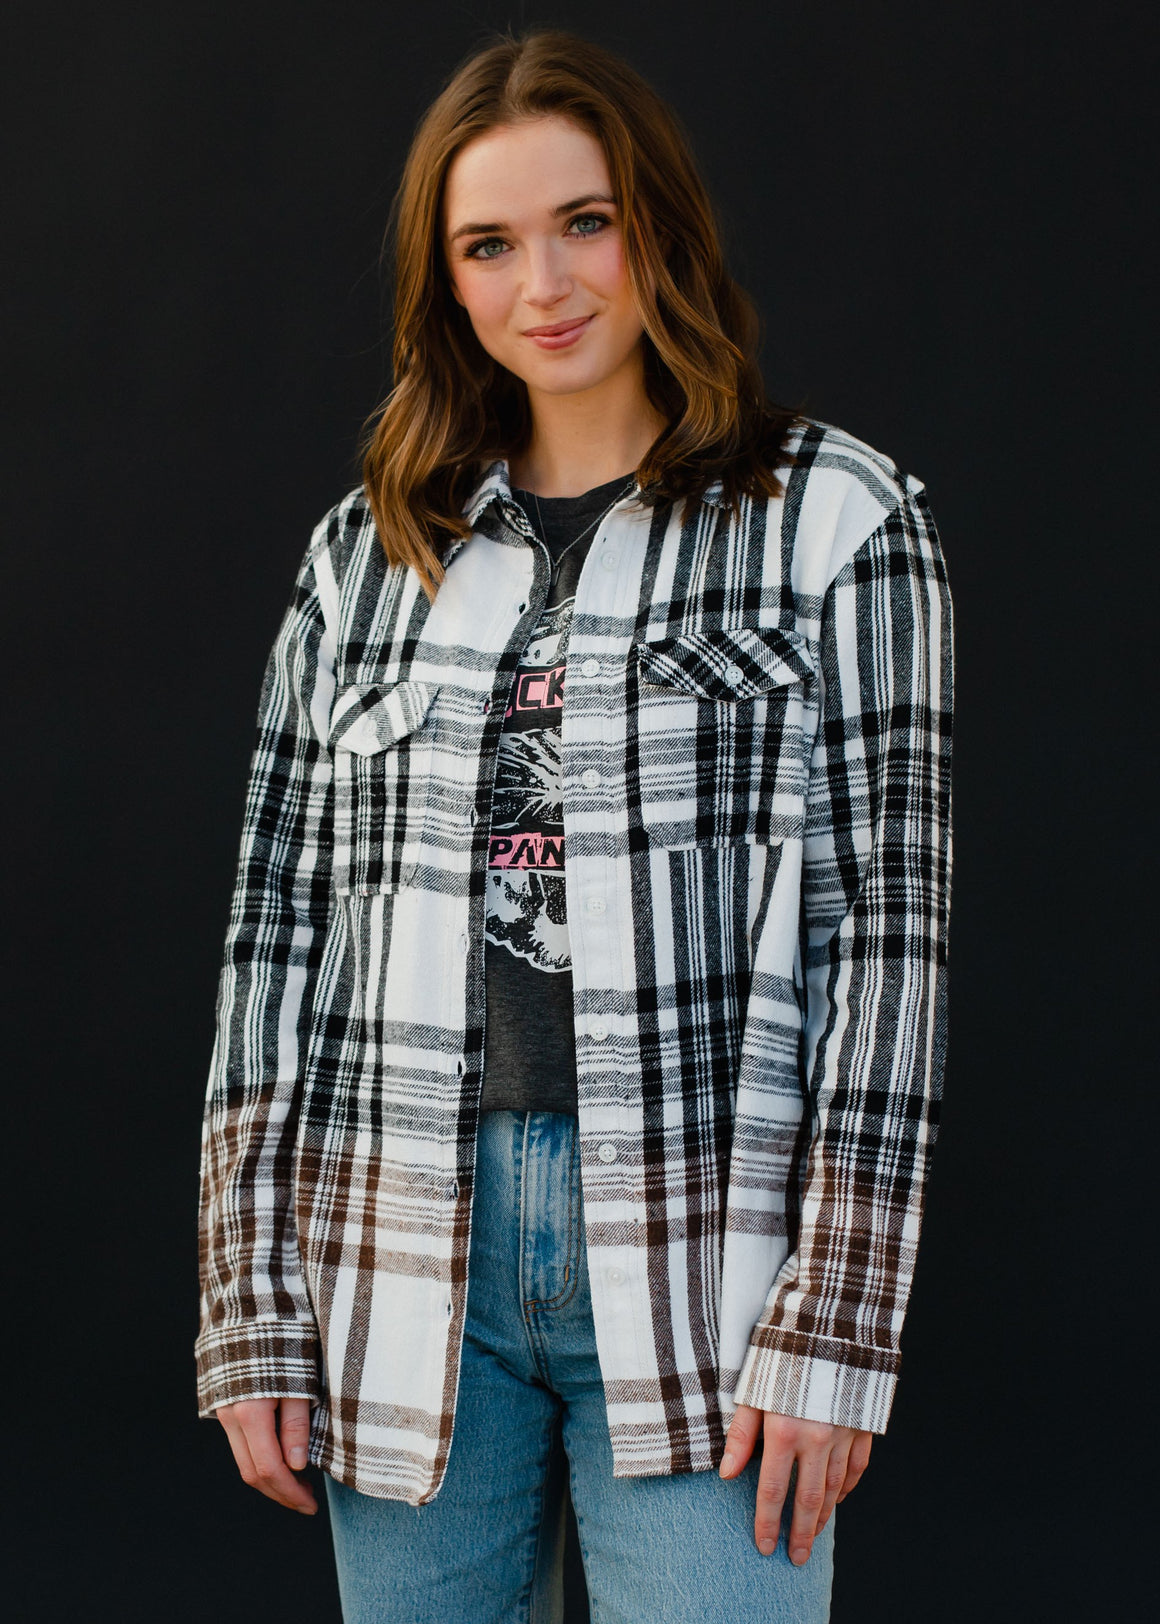 Hailey Ombre Plaid Flannel.